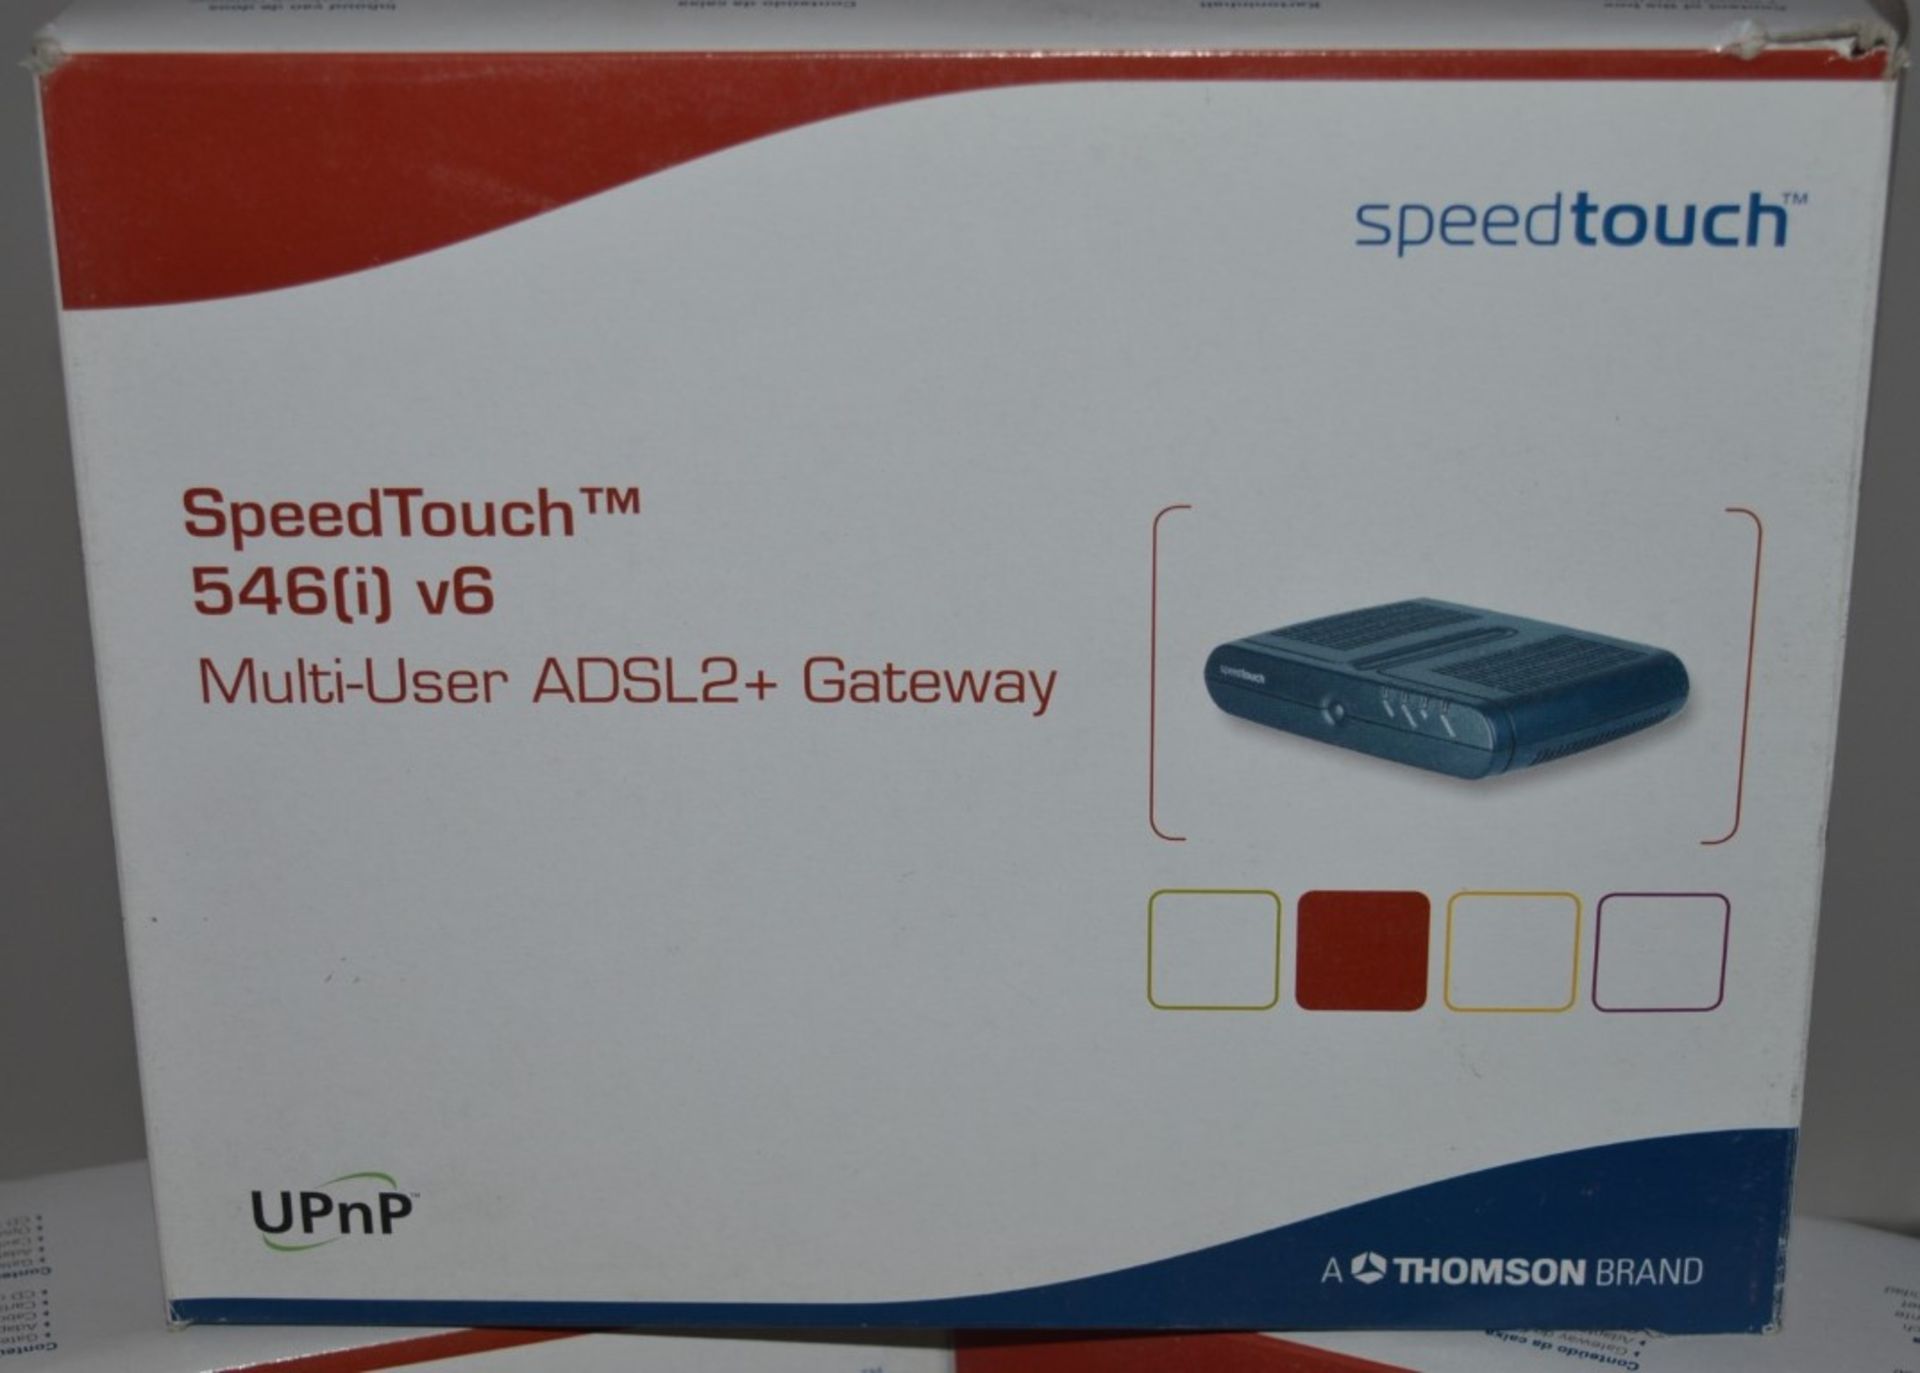 5 x Thompson Speedtouch 546i v6 Multi User ADSL2+ Gateway Router - New Boxed Stock - CL300 -